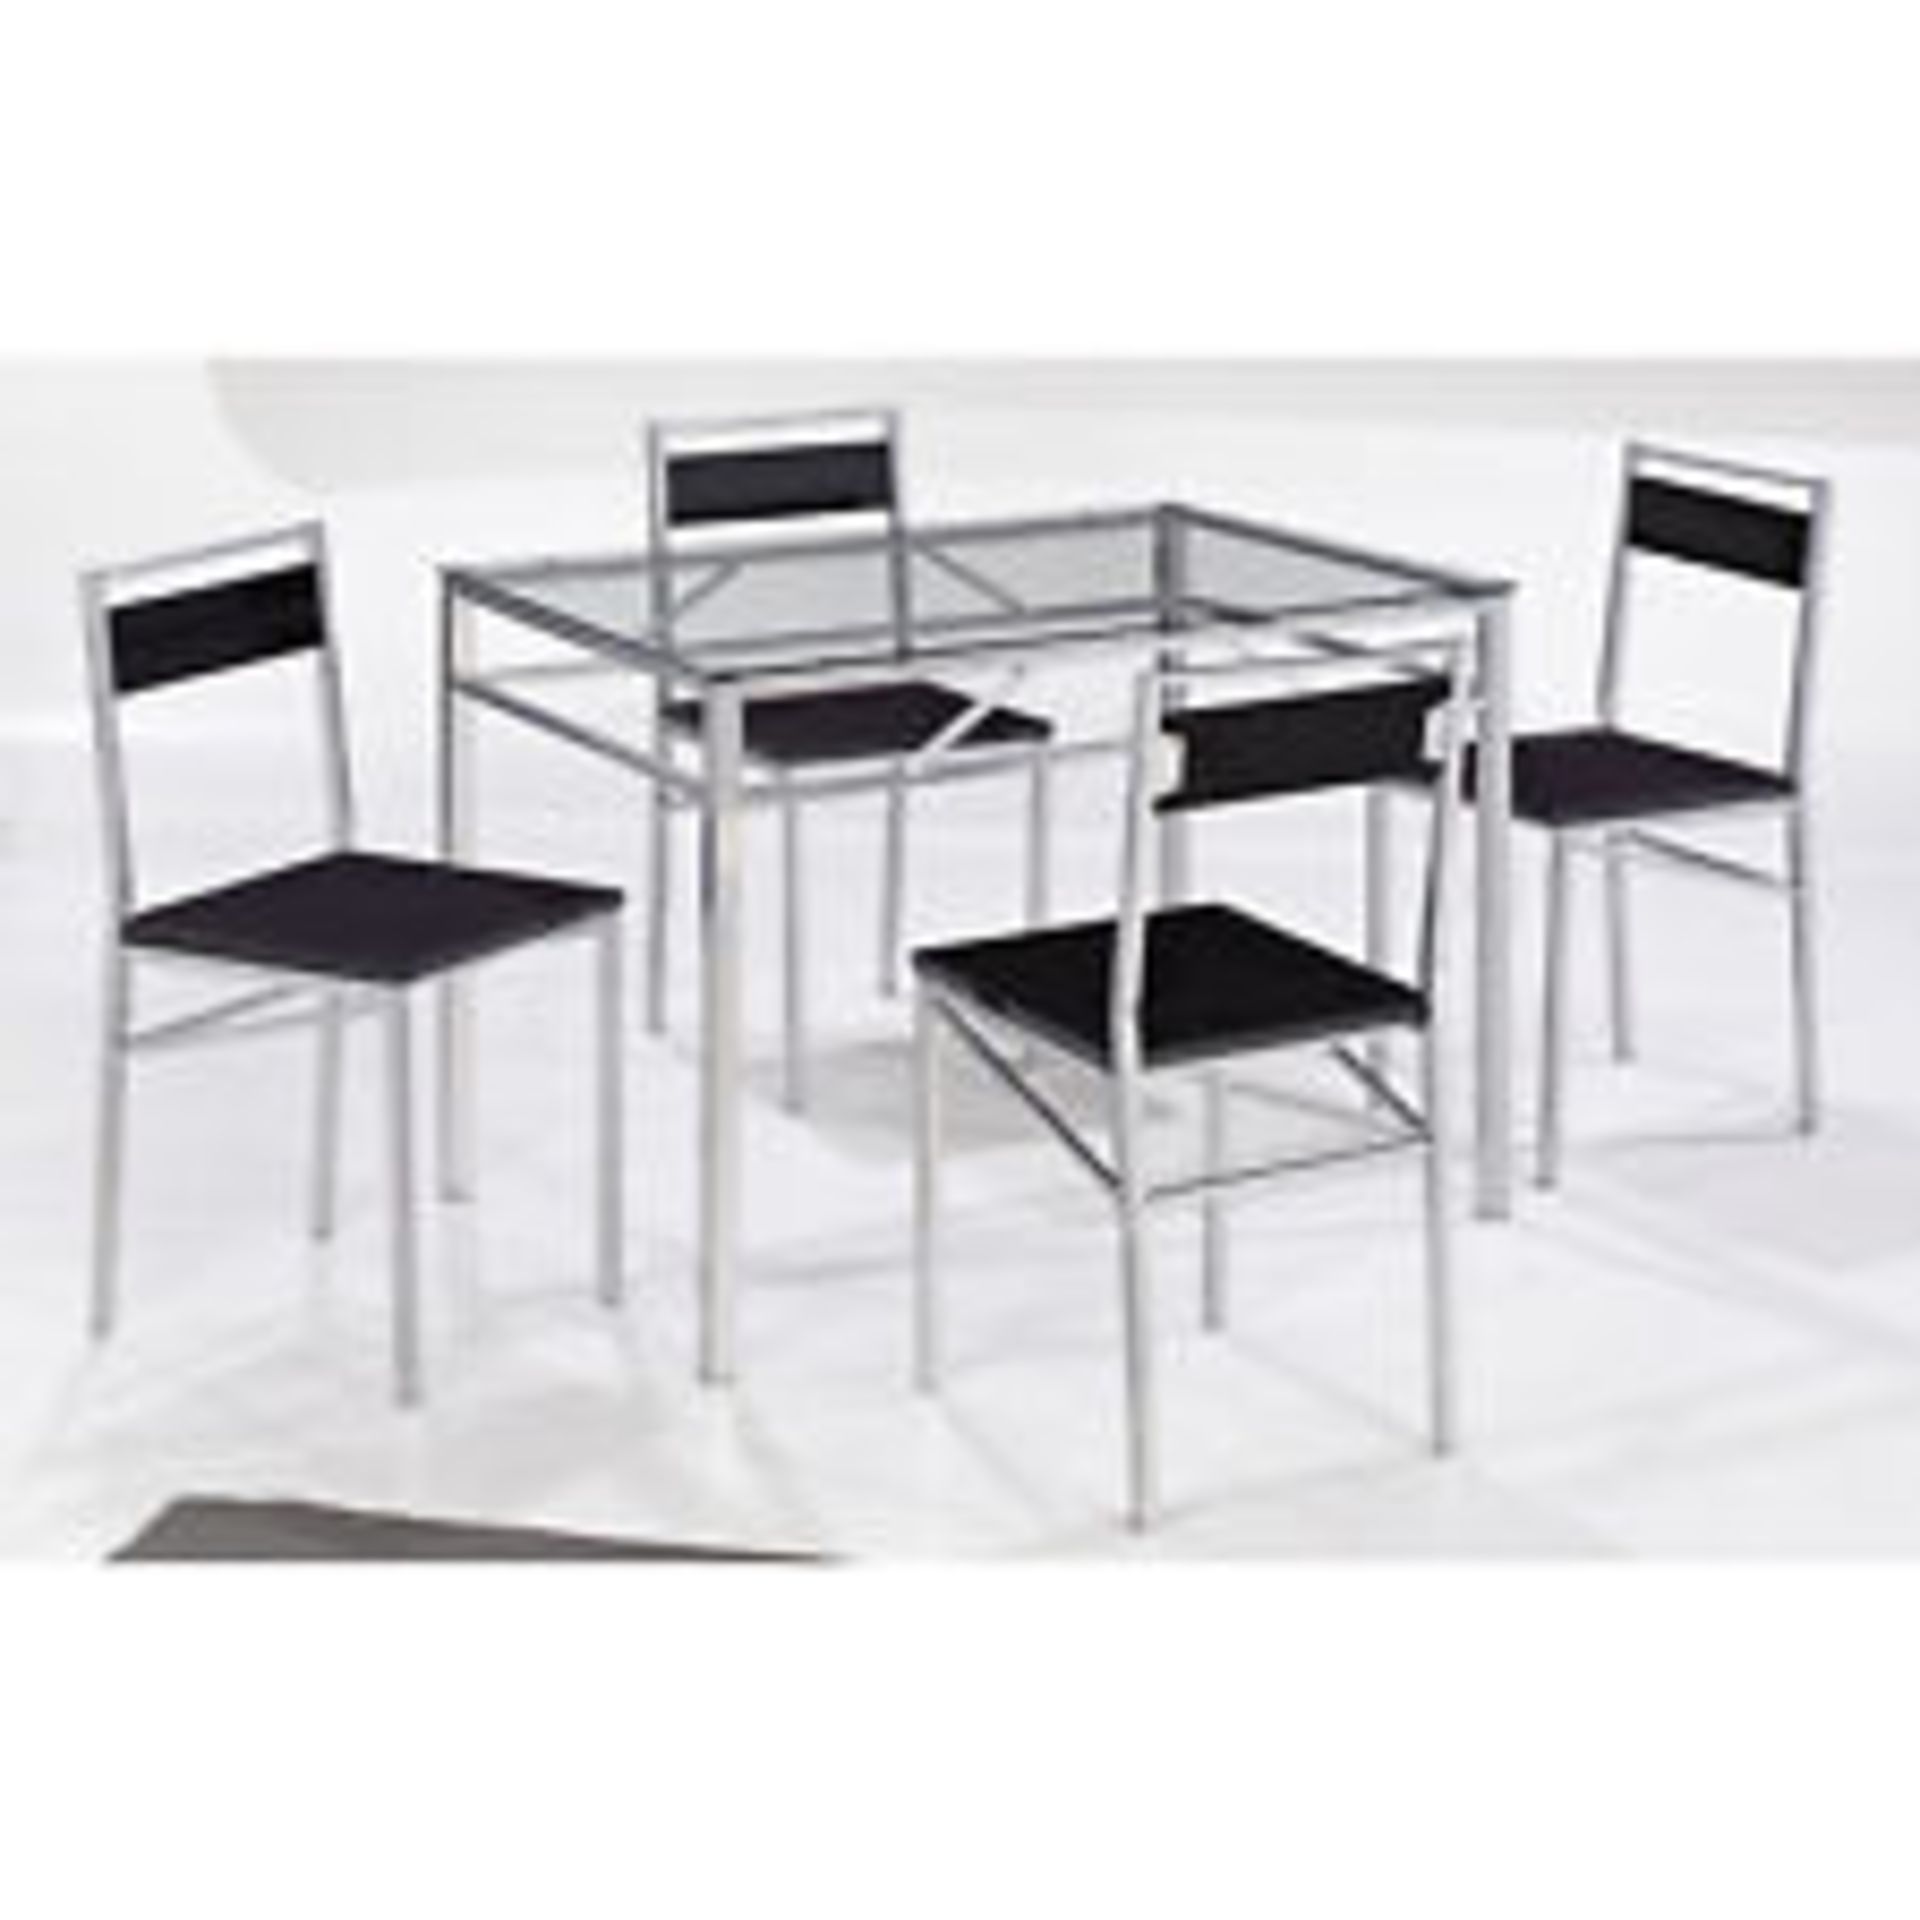 1 BRAND NEW BOXED TOKYO 5 PIECE BLACK AND SILVER DINING SET